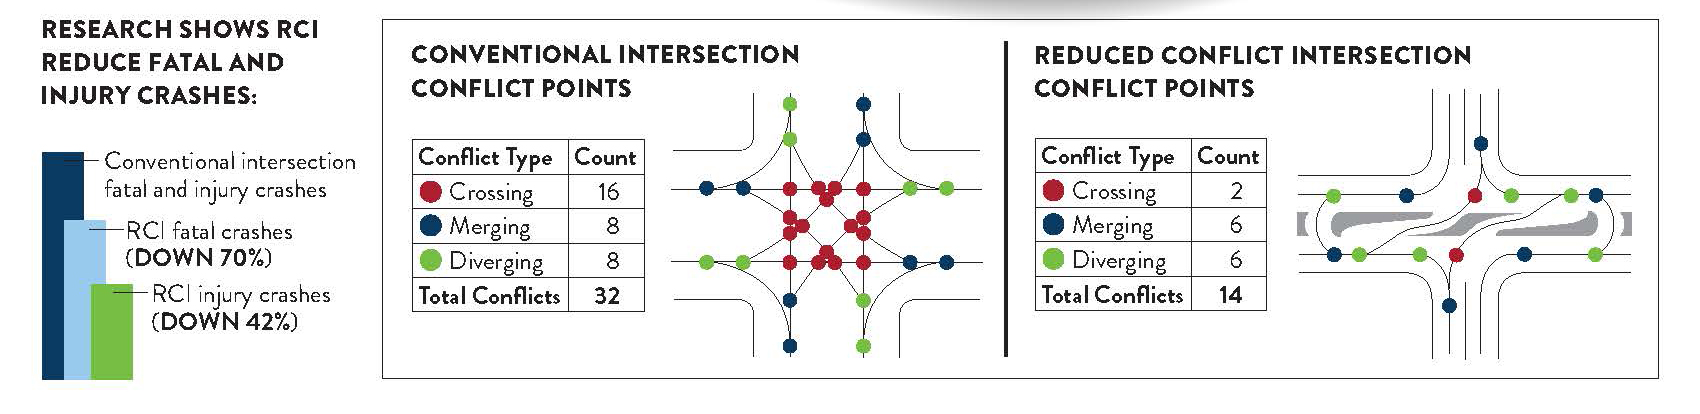 Data showing that conventional intersections have thirty-two conflict points. Reduced conflict intersections have fourteen conflict points.